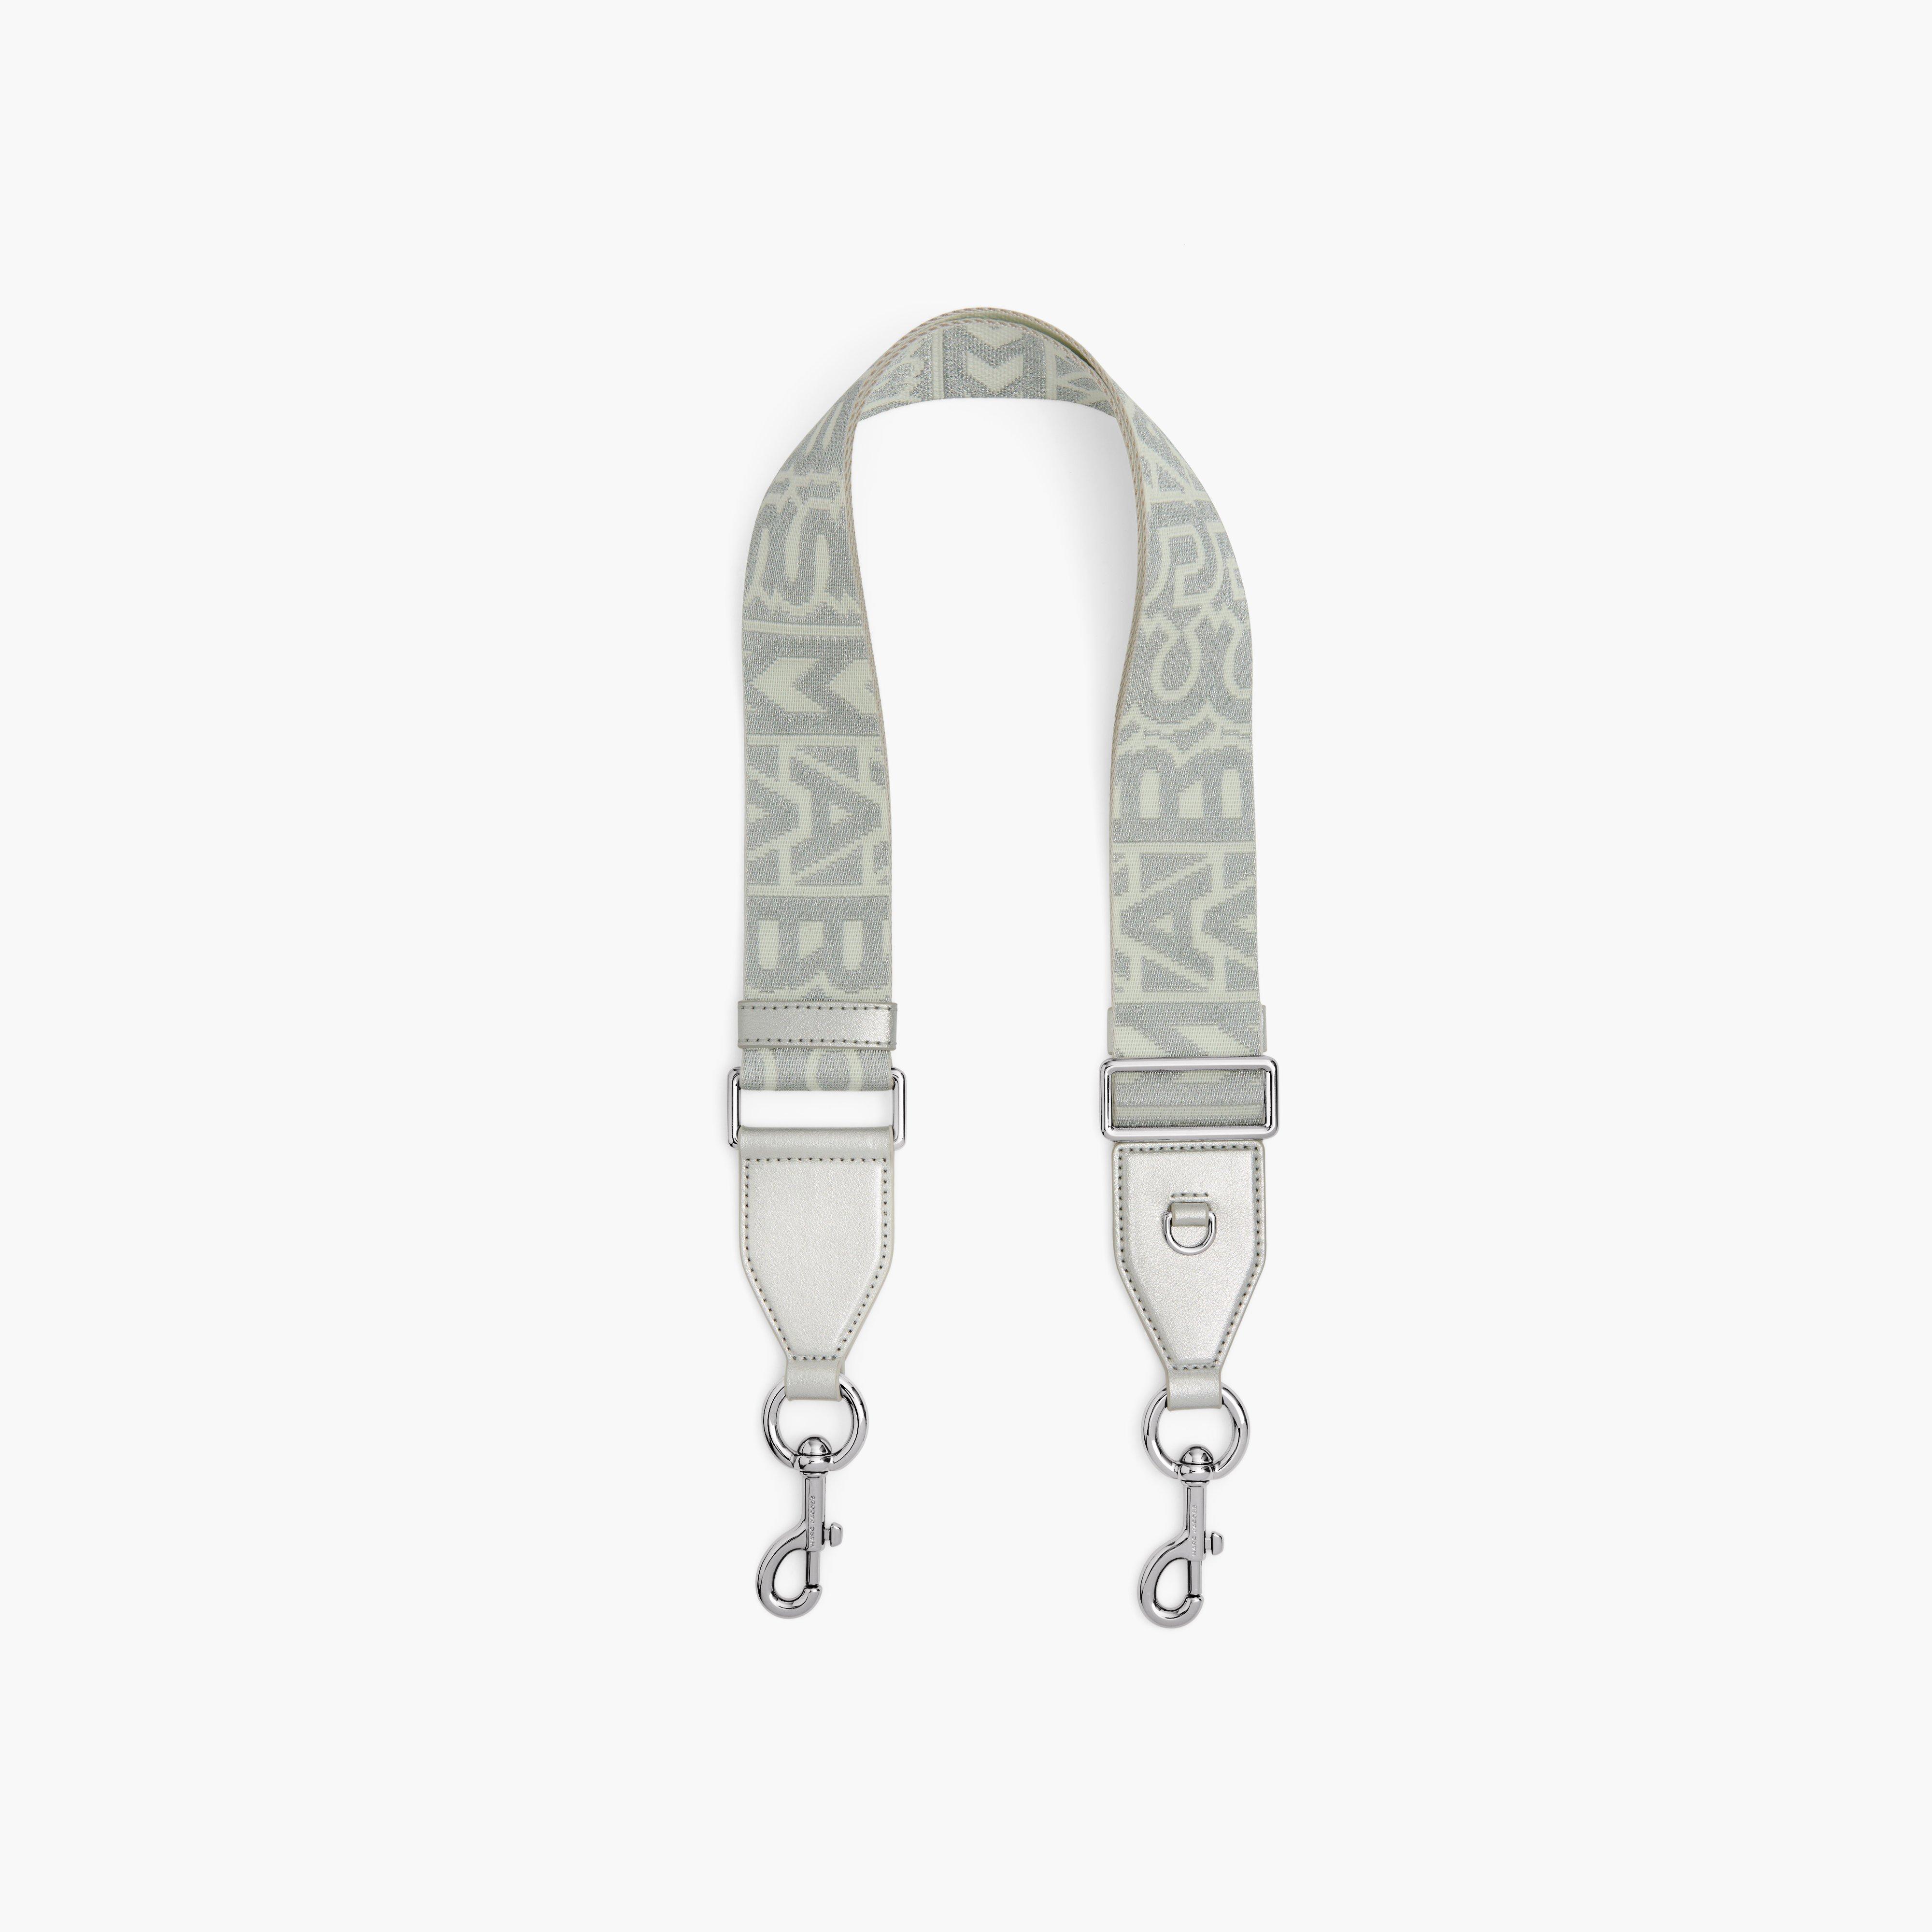 Marc by Marc jacobs The Monogram Utility Webbing Strap,WHITE/SILVER